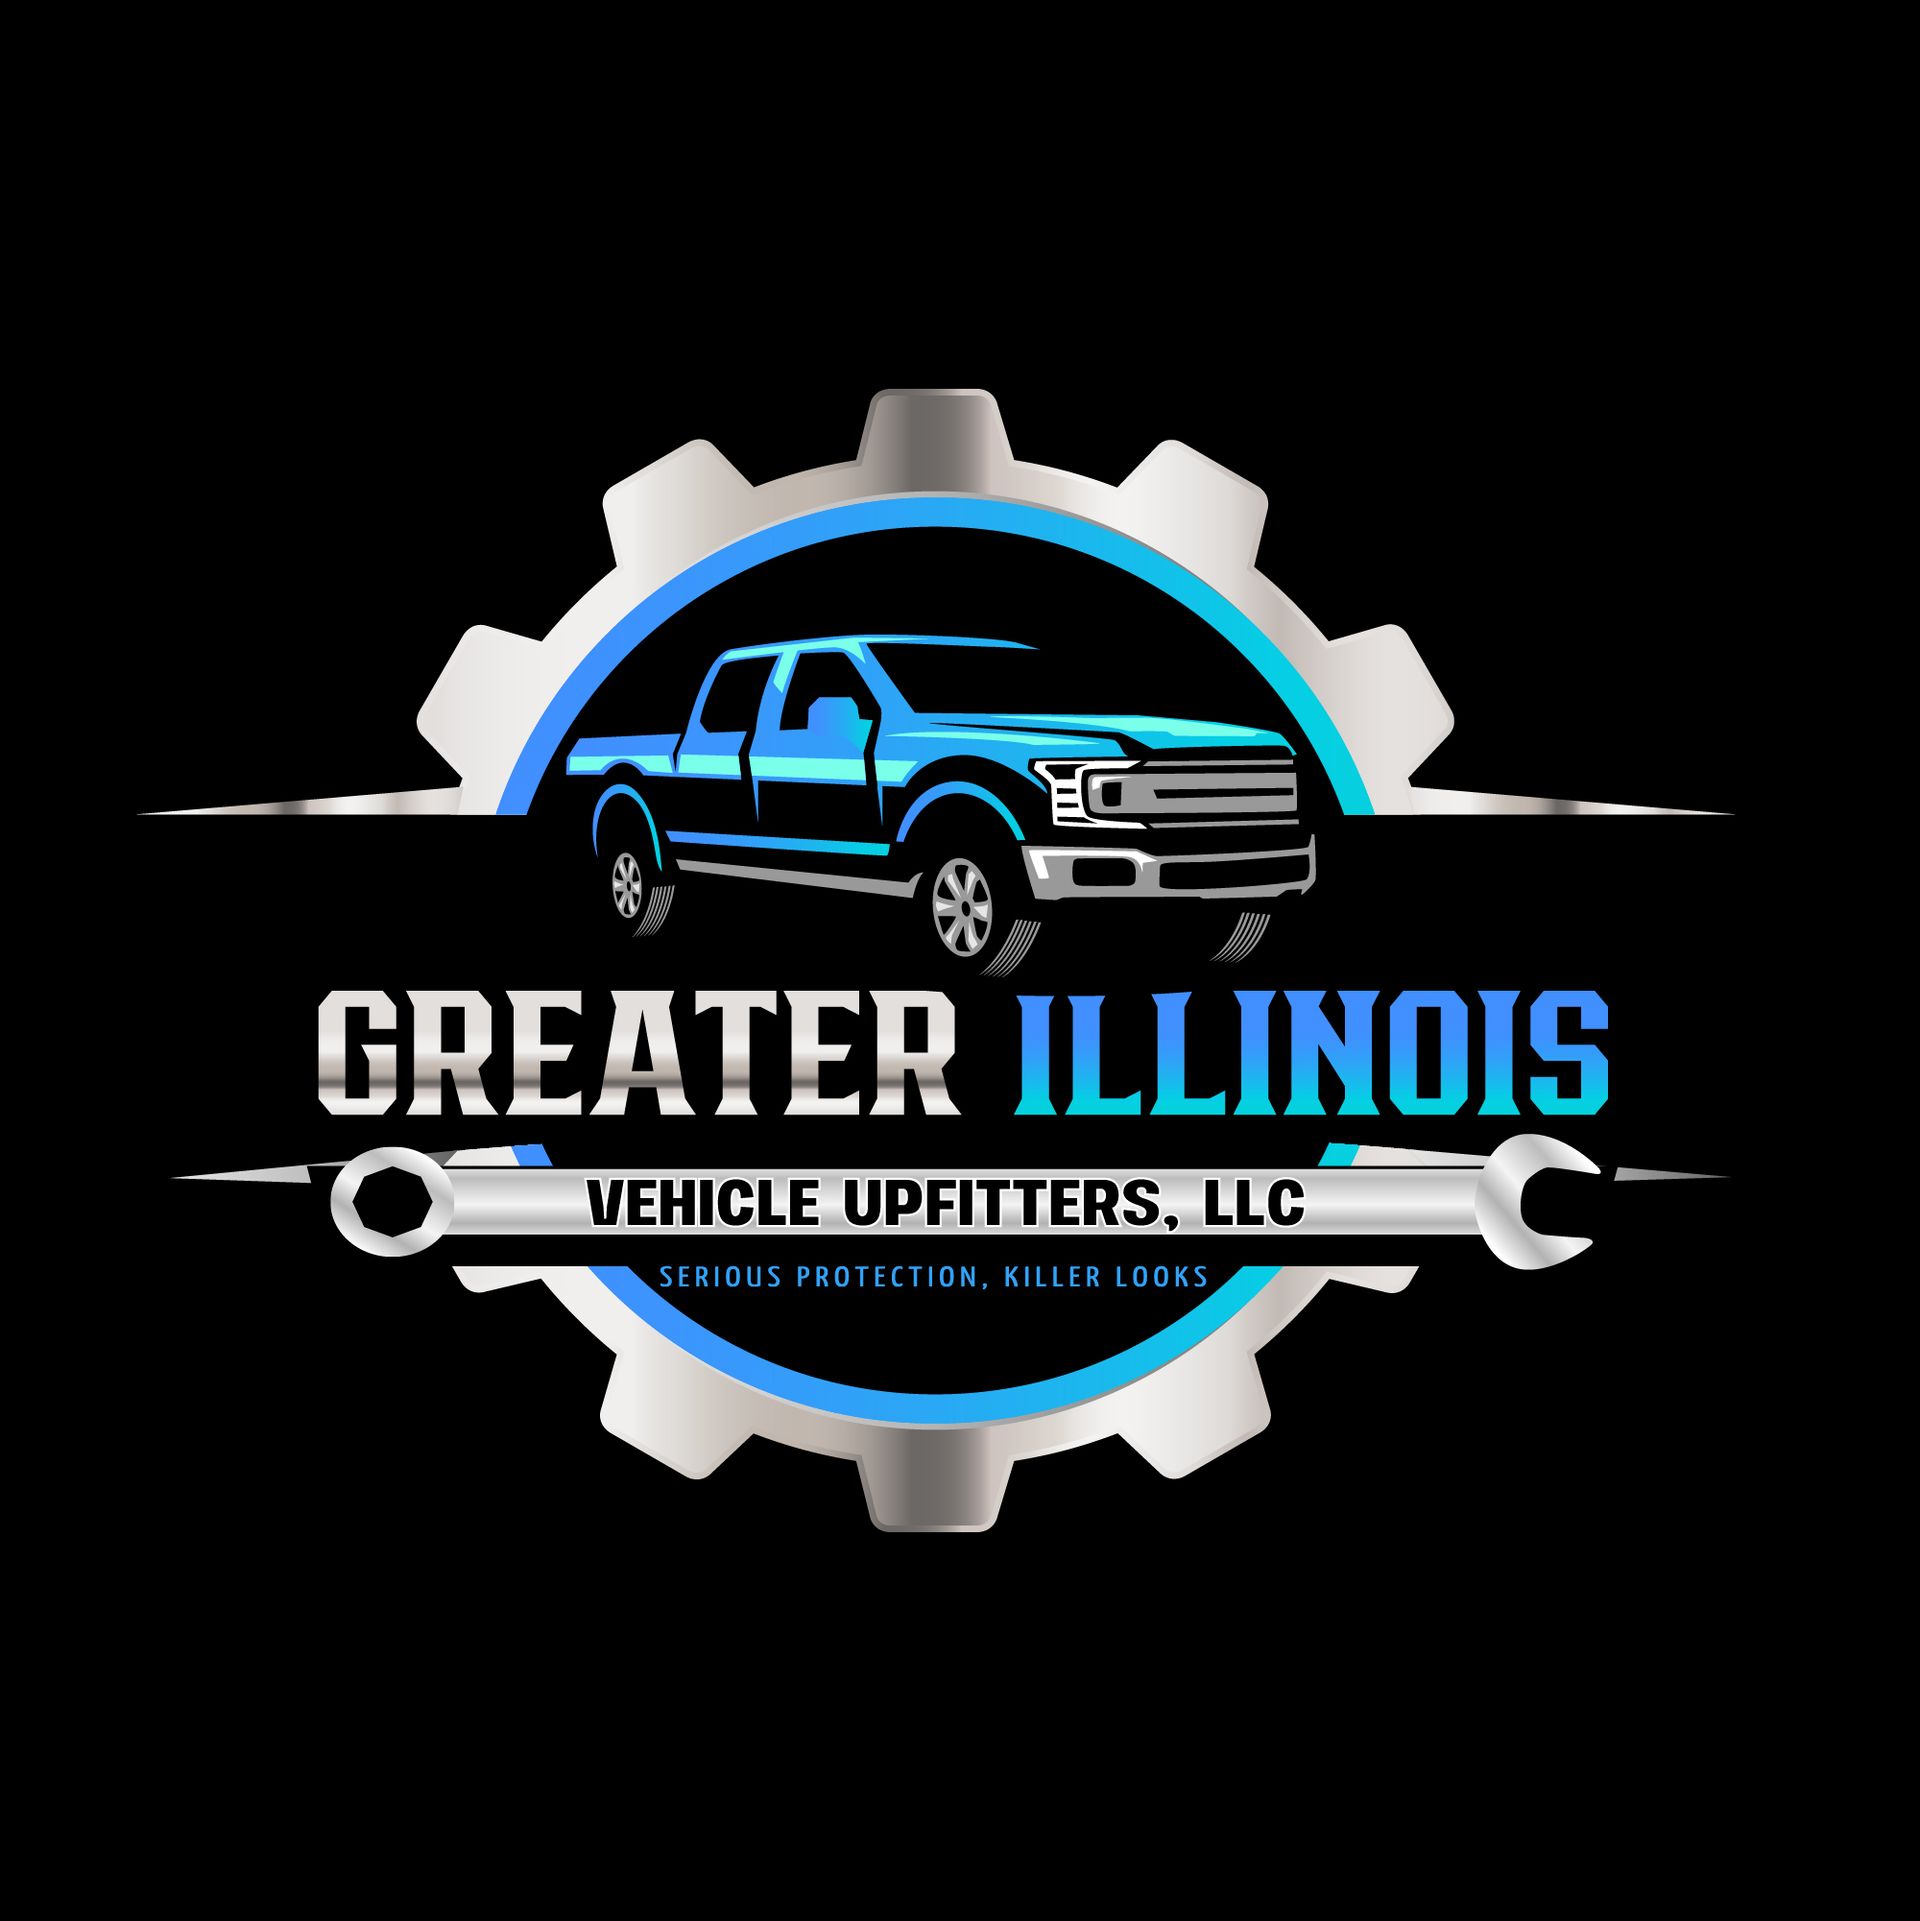 Line-X of Greater Illinois logo